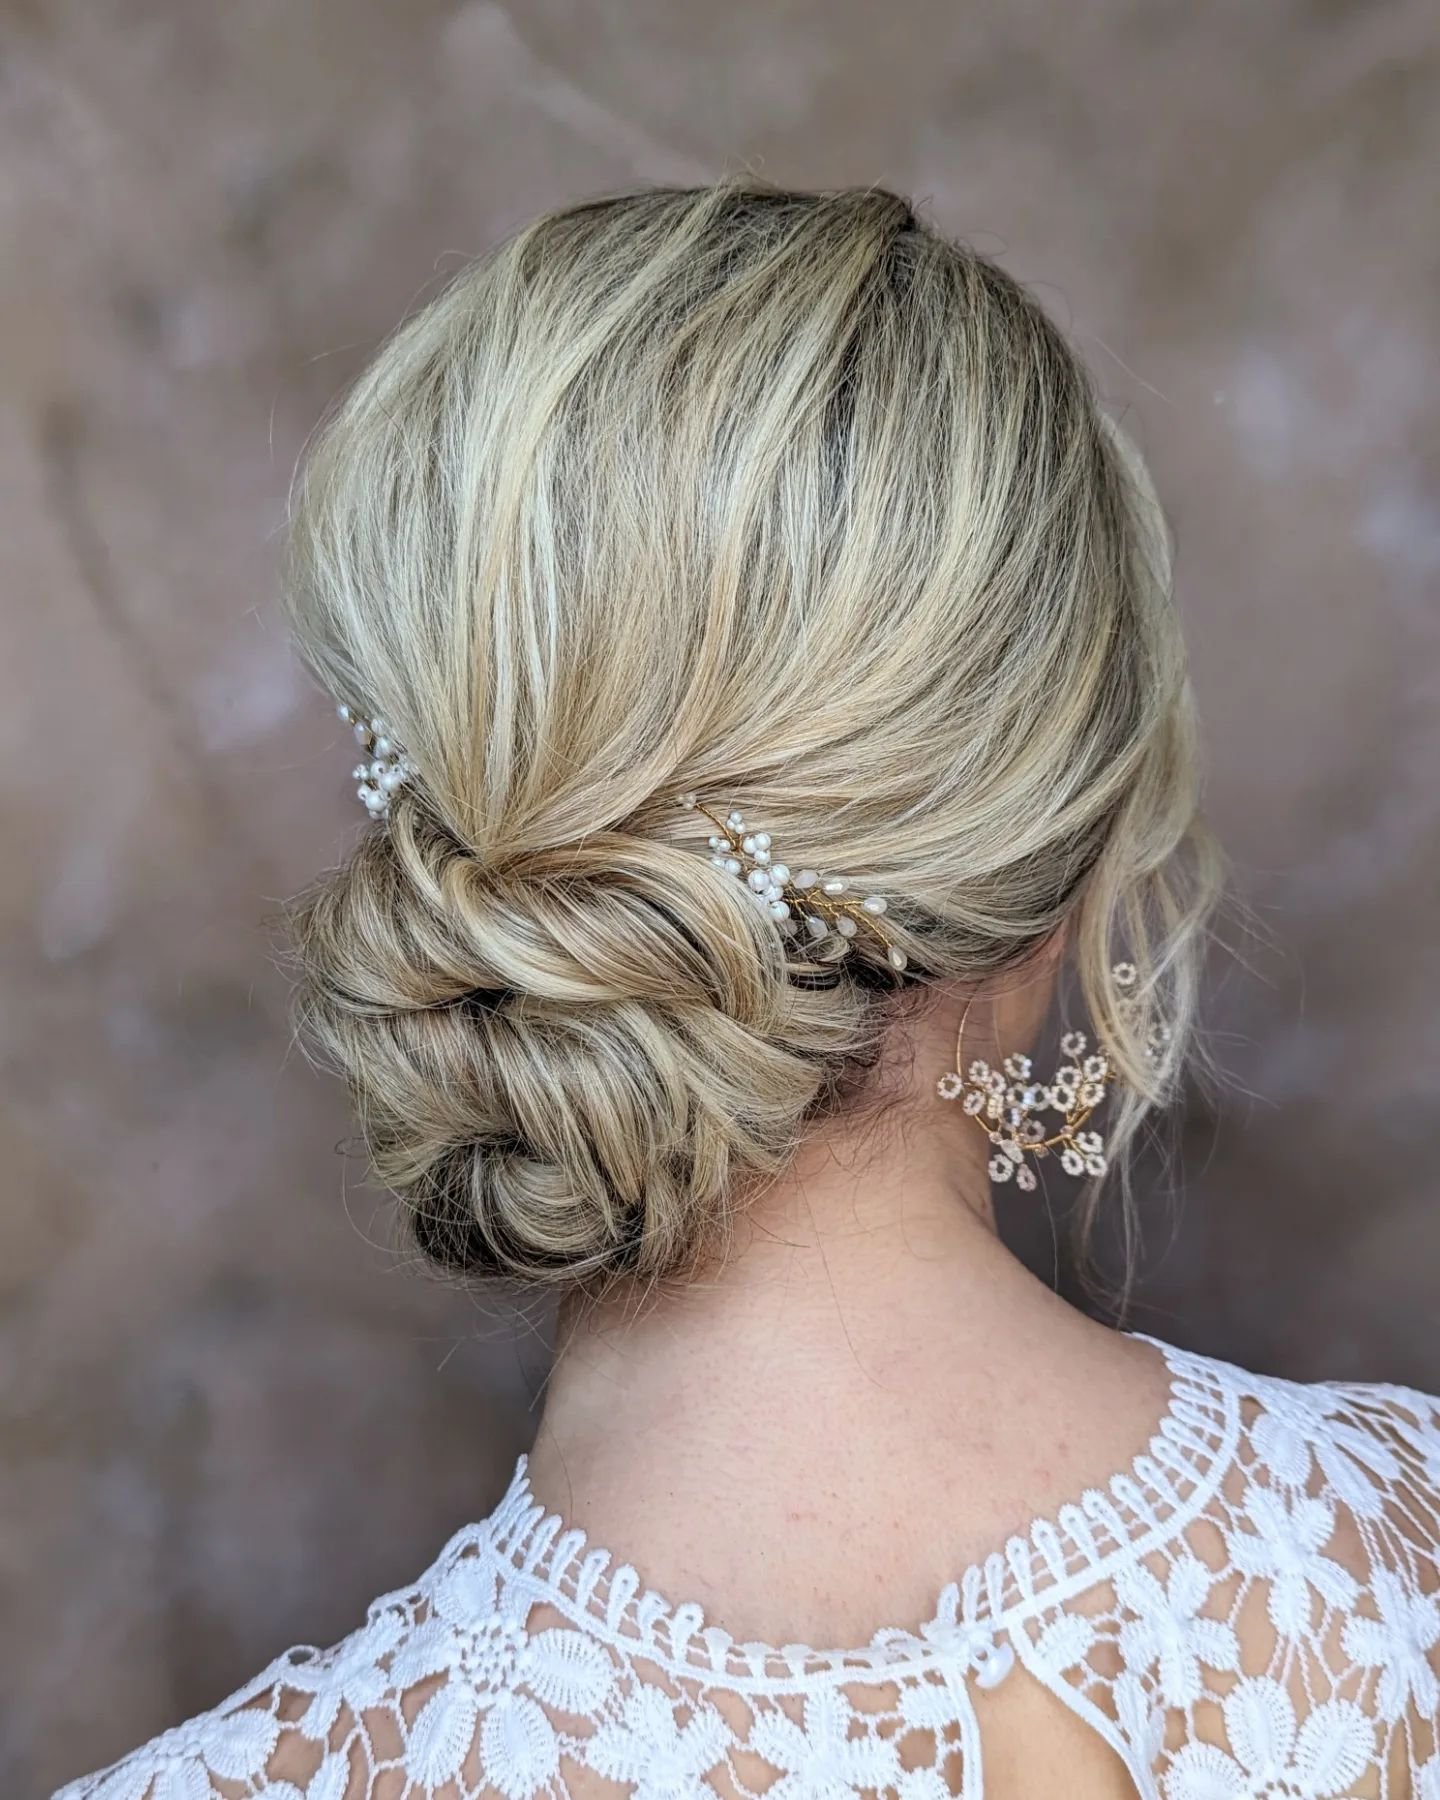 Feeling lost in a sea of bridal updo options? Don't worry, I'm here to help!

Here are my 3 top tips to help you choose the perfect wedding updo for your big day:

1. Your hair type - your hair type plays a big role in finding the right updo for you.